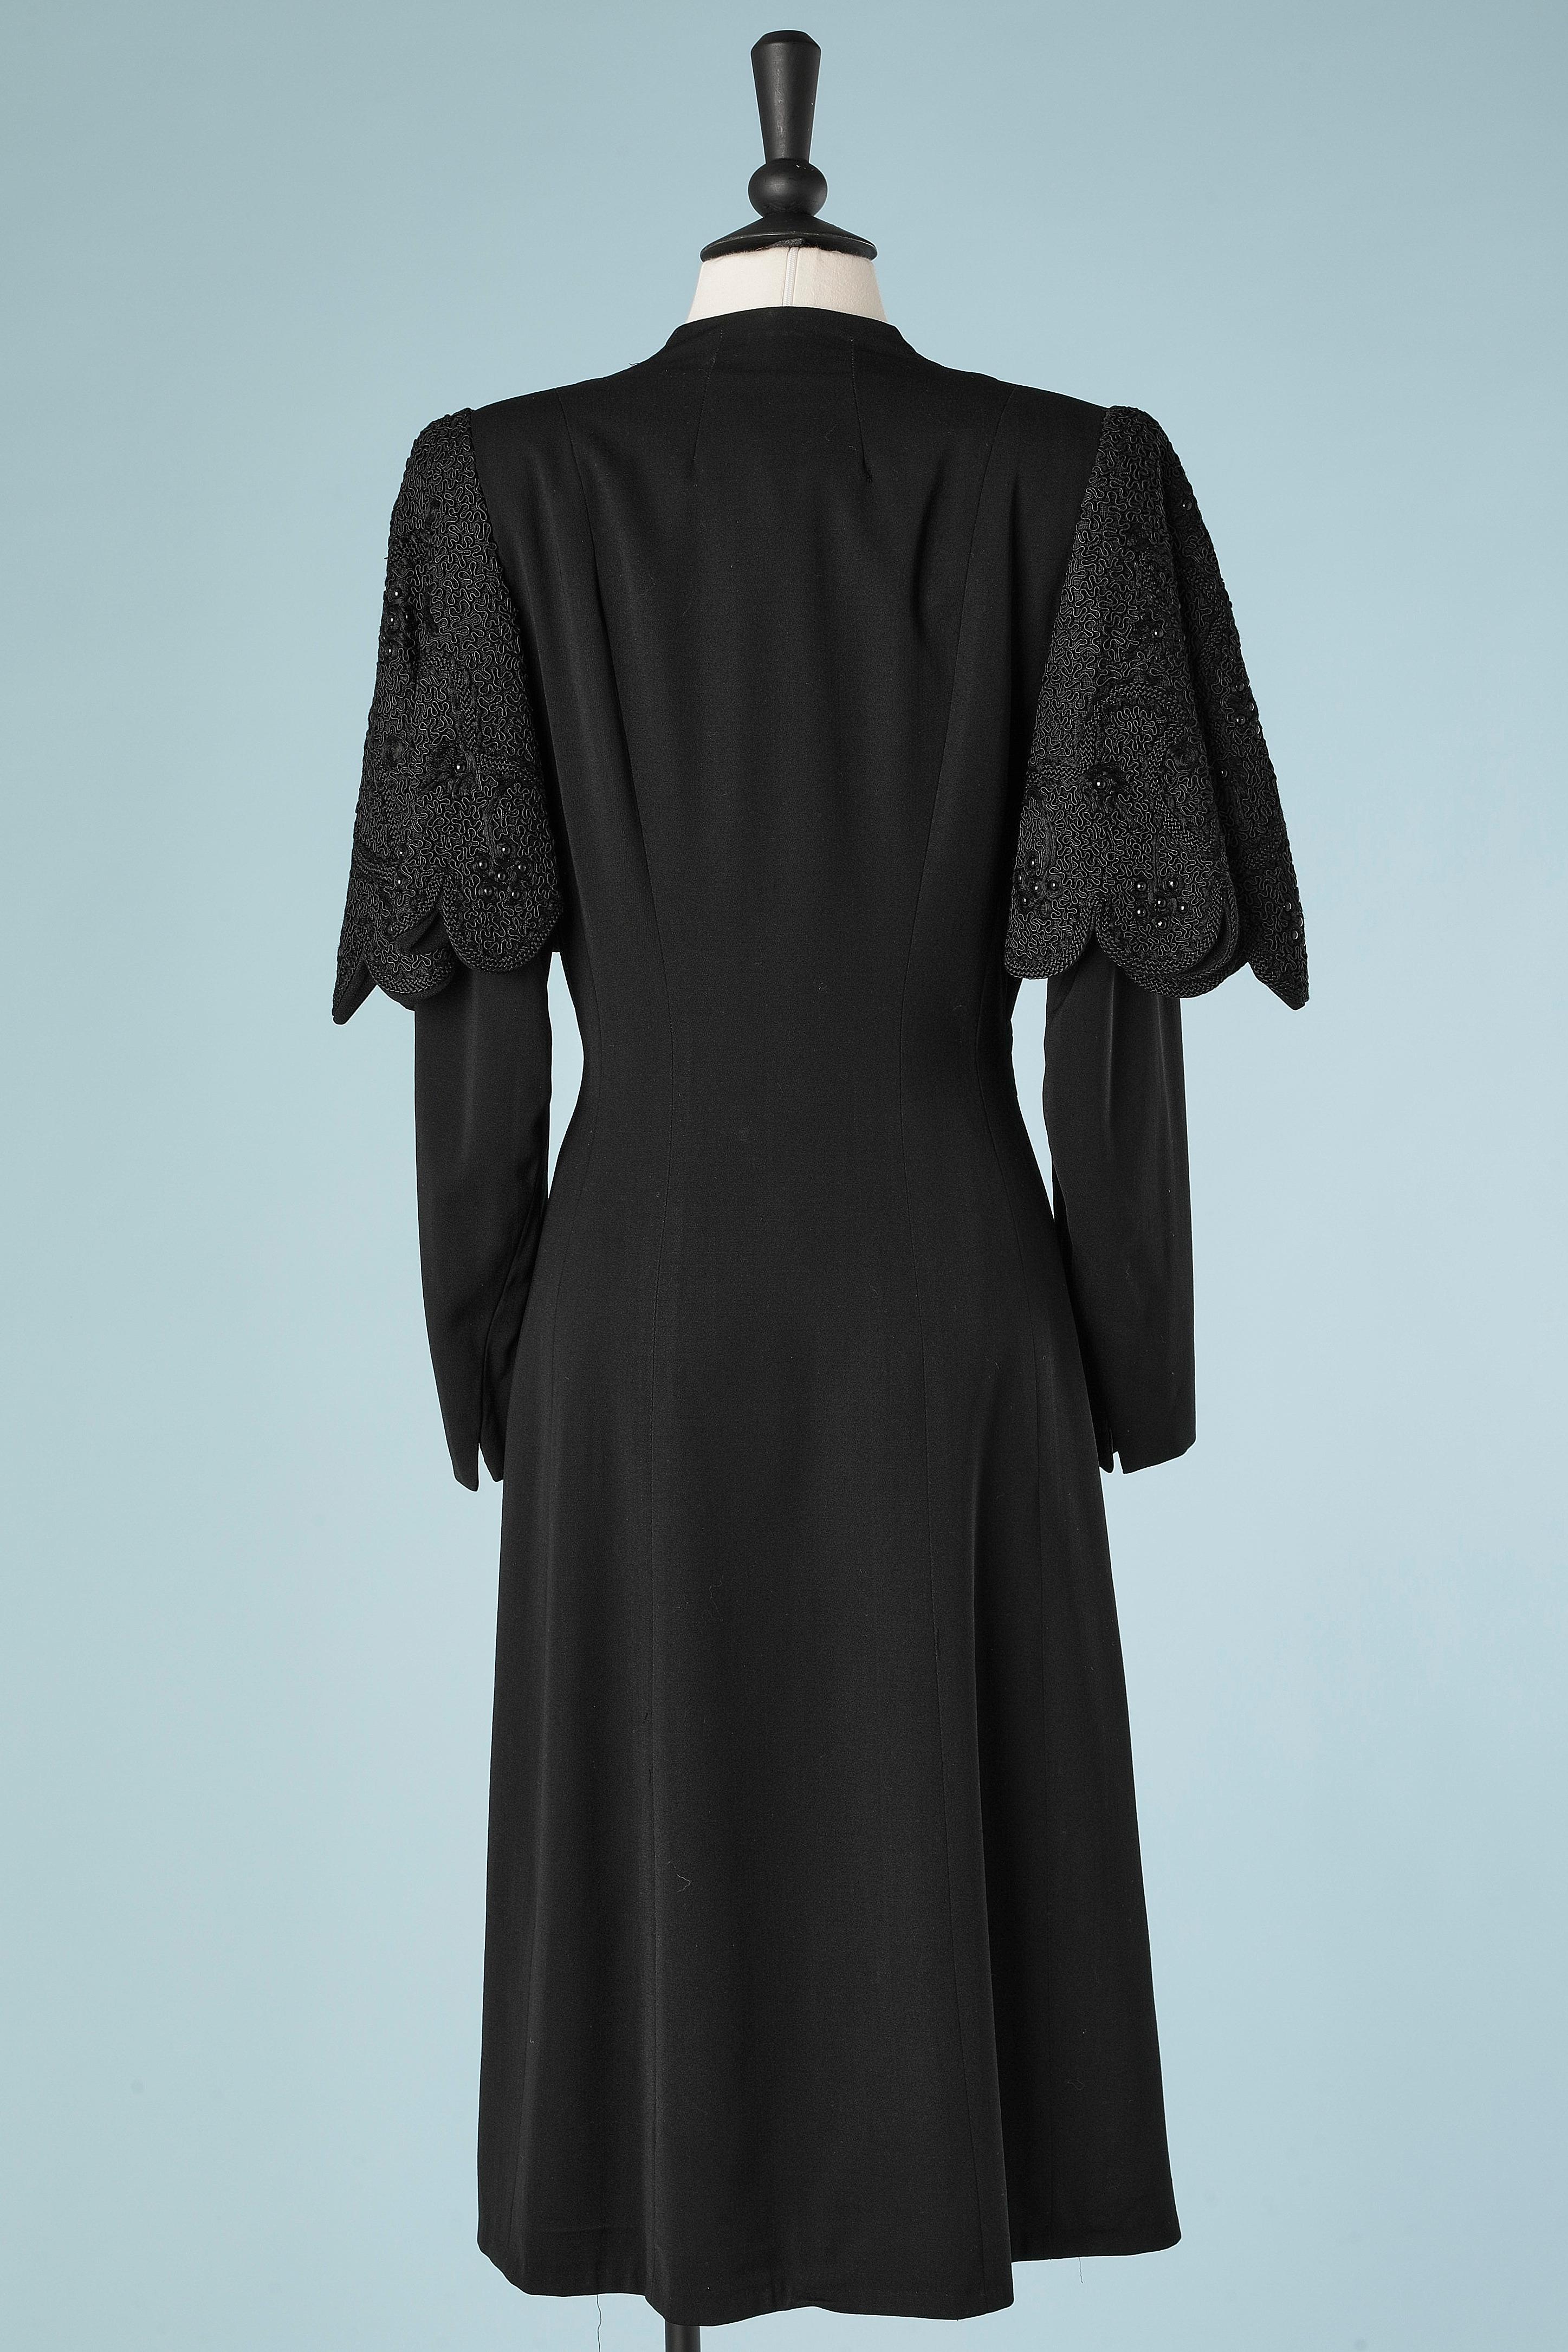 Black evening coat with over-sleeves in passementerie The Novelty Circa 1930's  For Sale 2